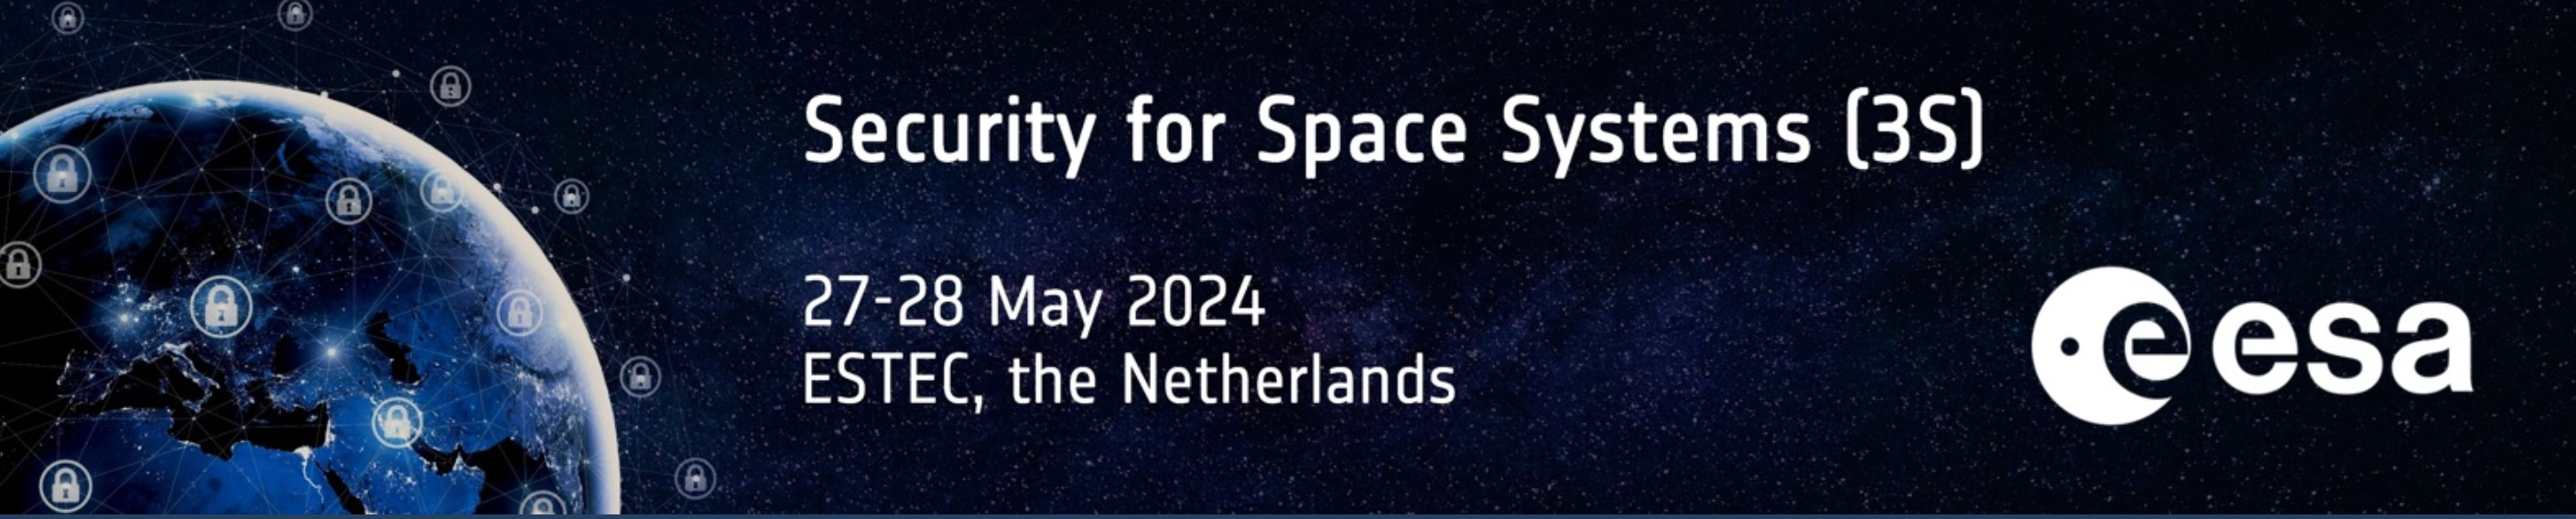 2024 Security for Space Systems Conference